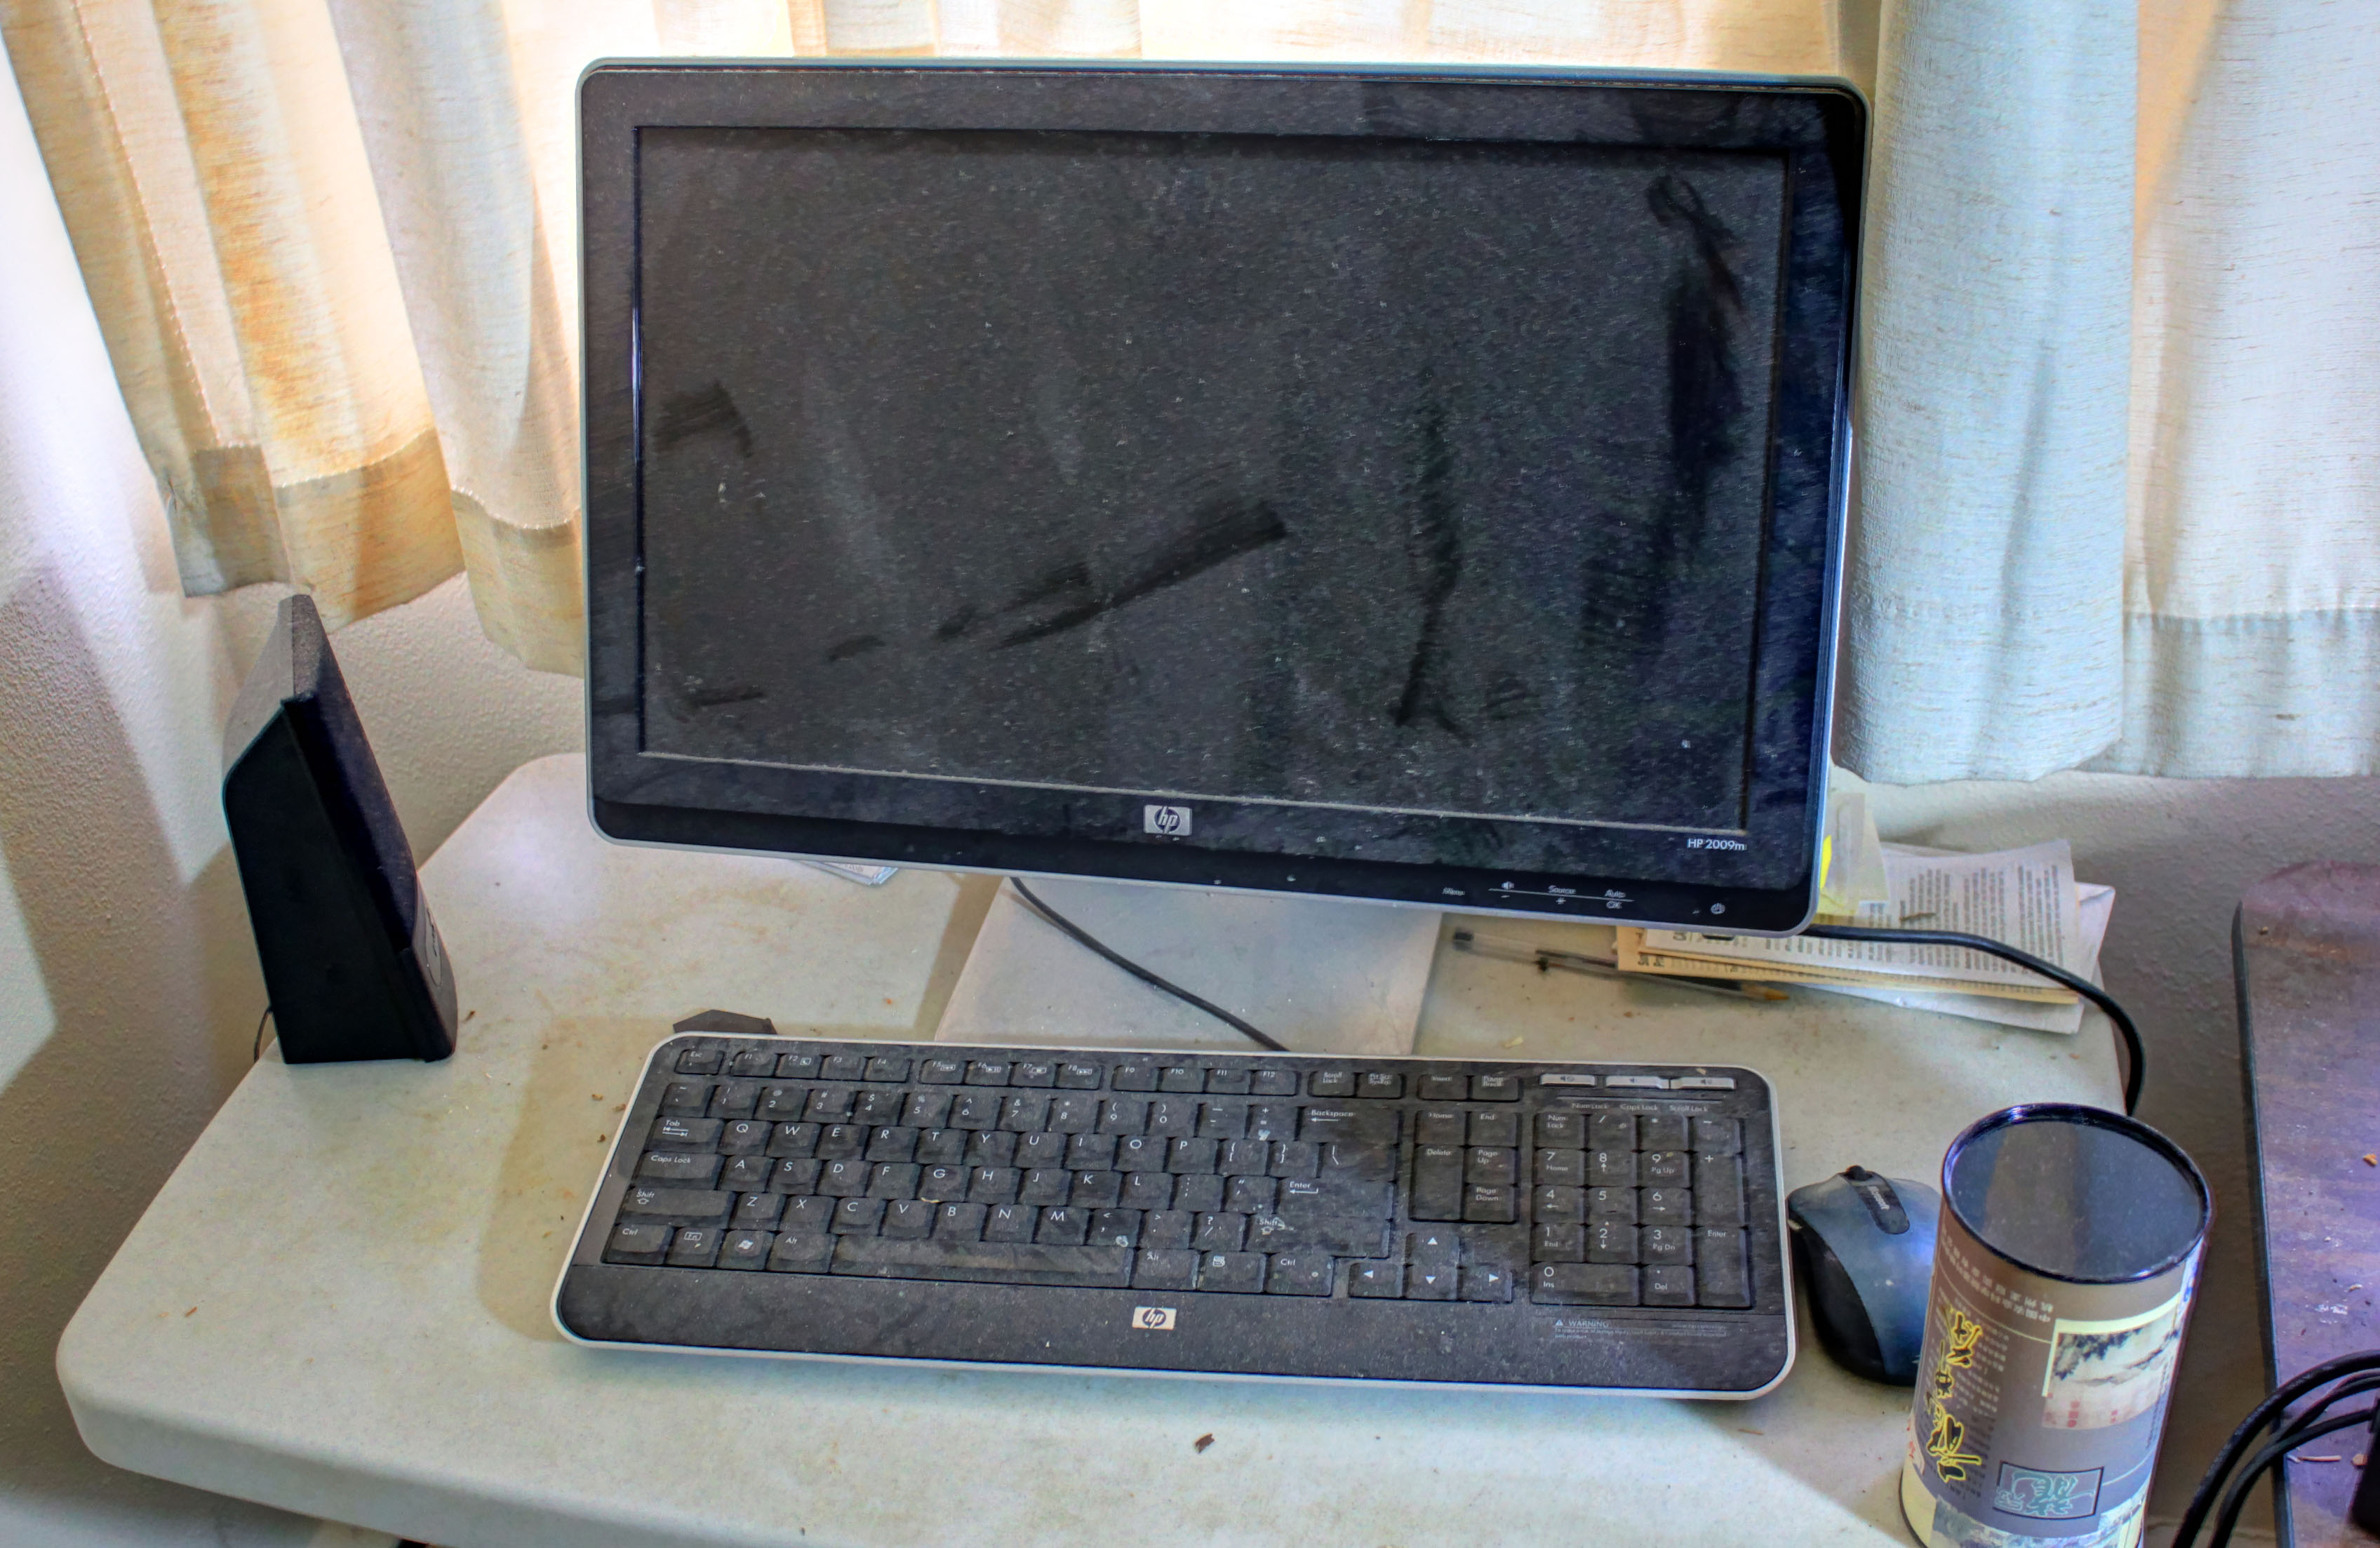 Dusty computer screen and keyboard